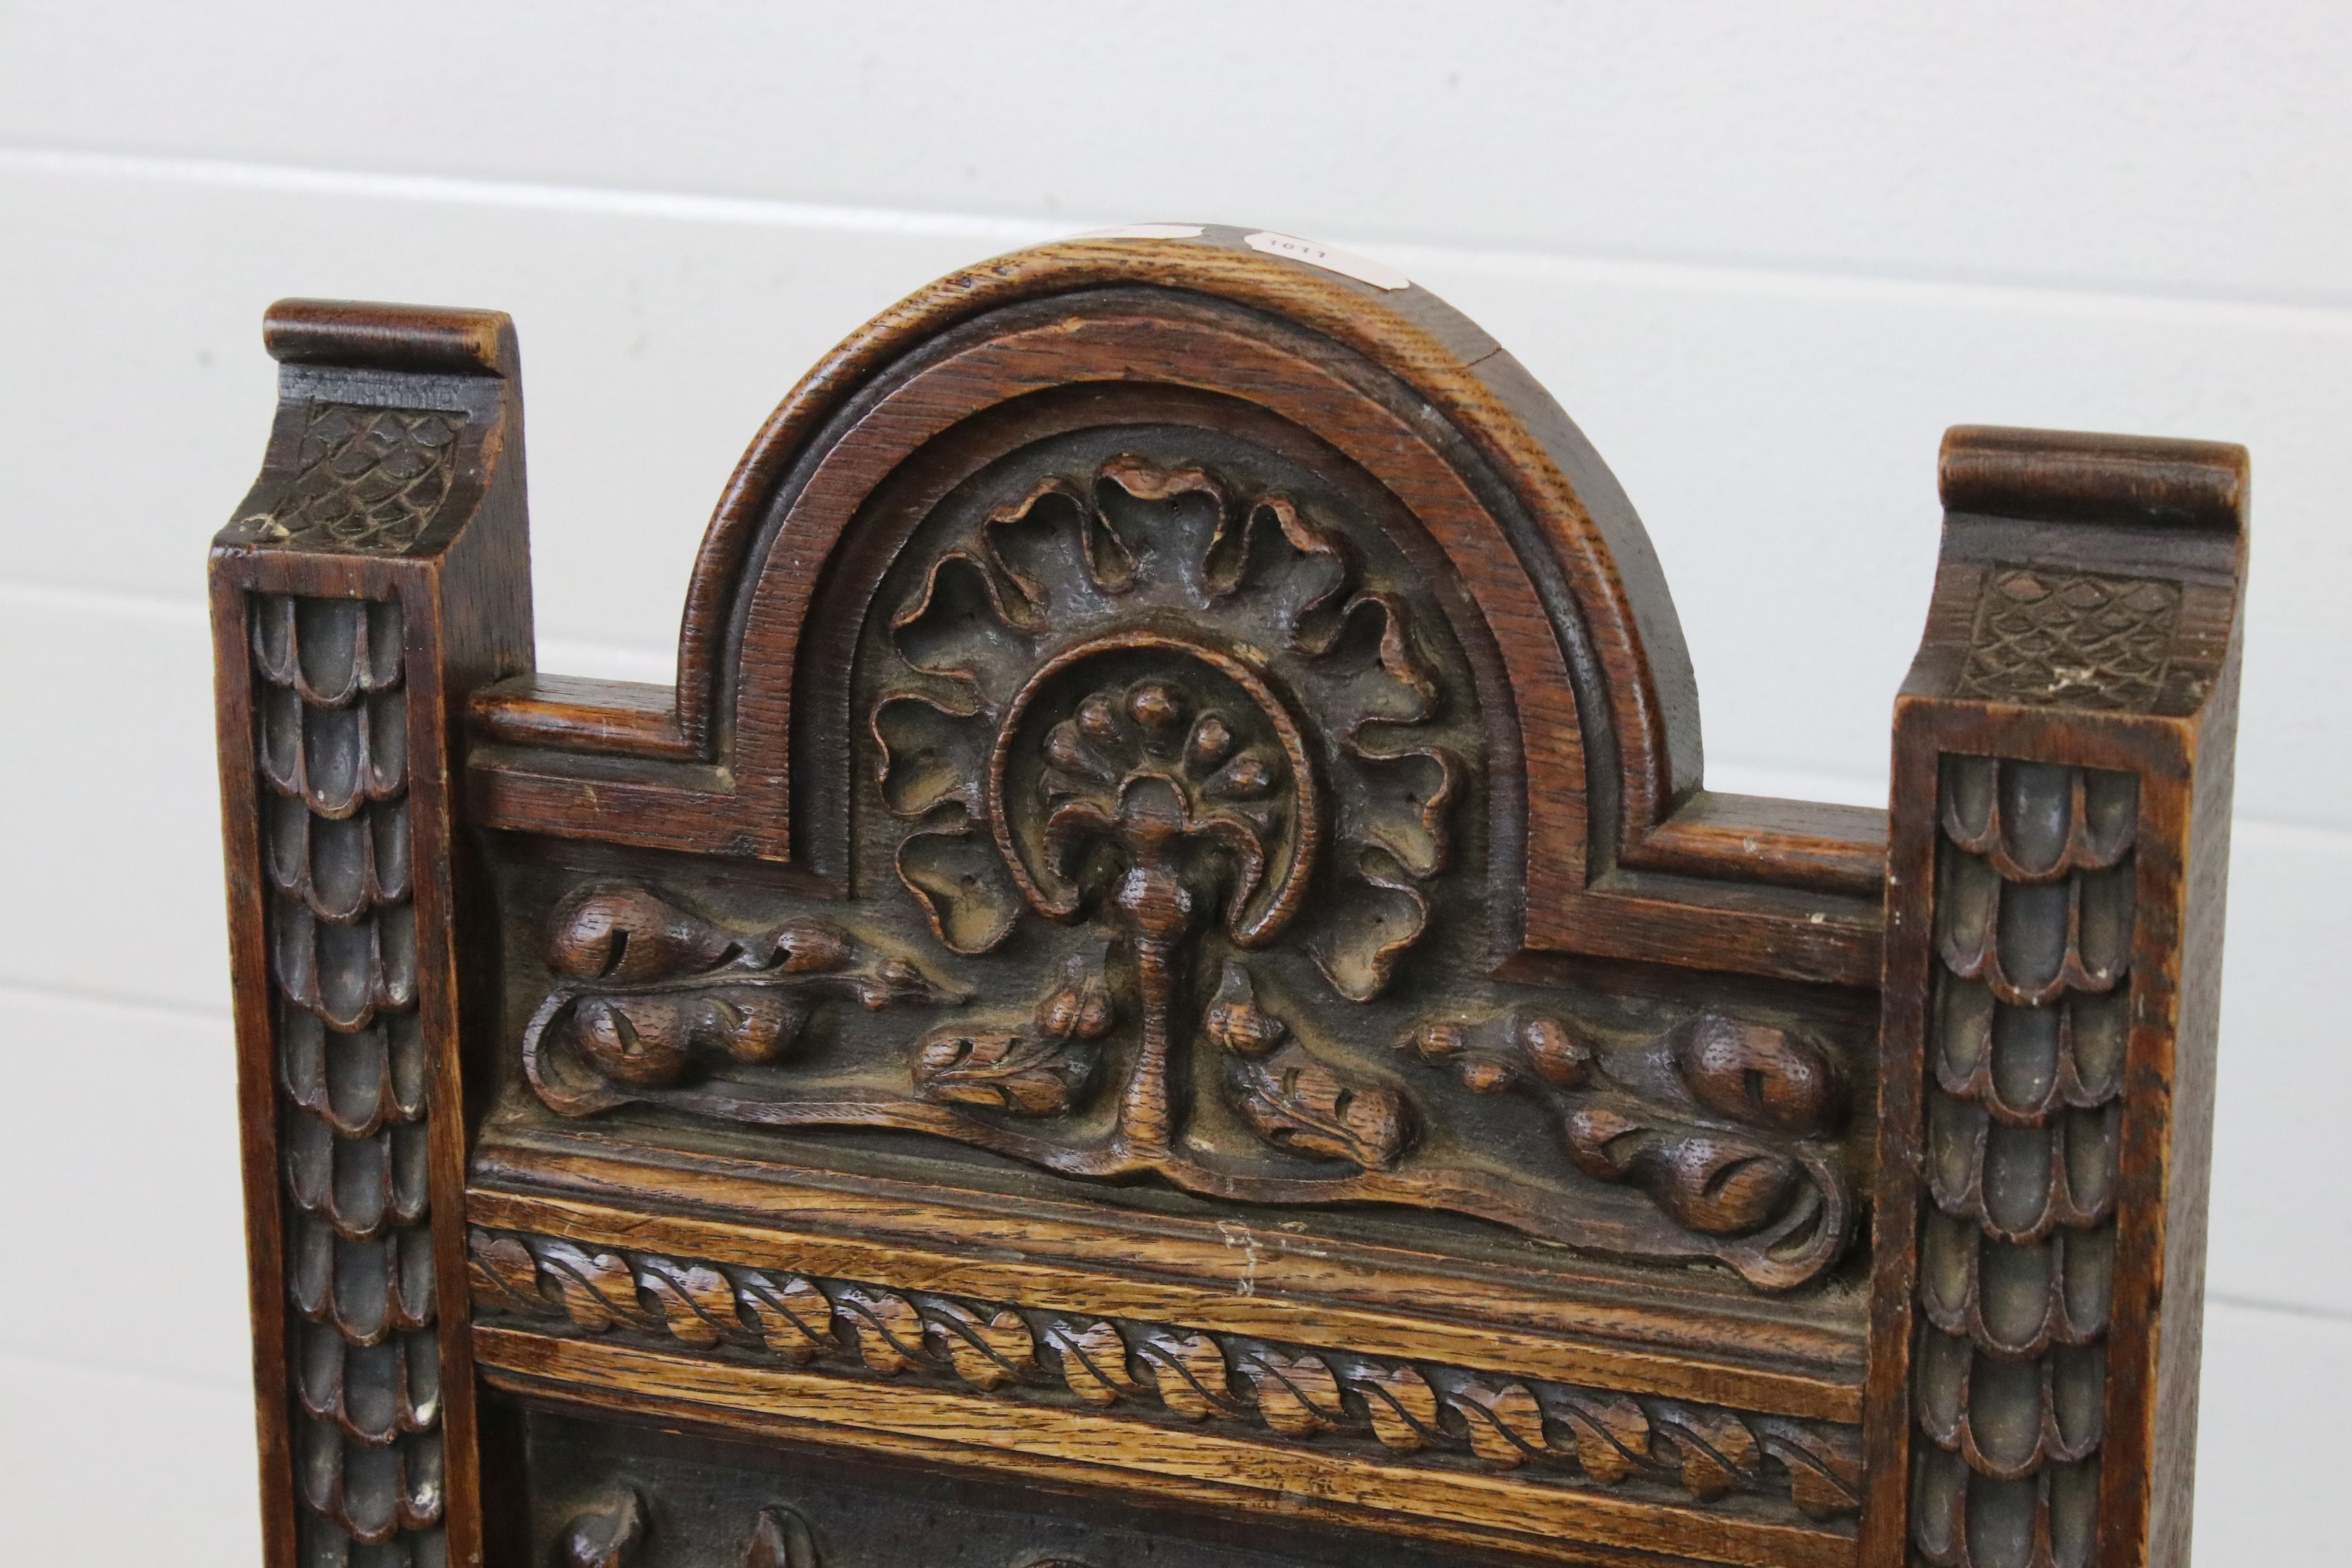 Victorian Jacobean Revival Oak Hall Chair, the arched rectangular back heavily carved with foliage - Image 3 of 5